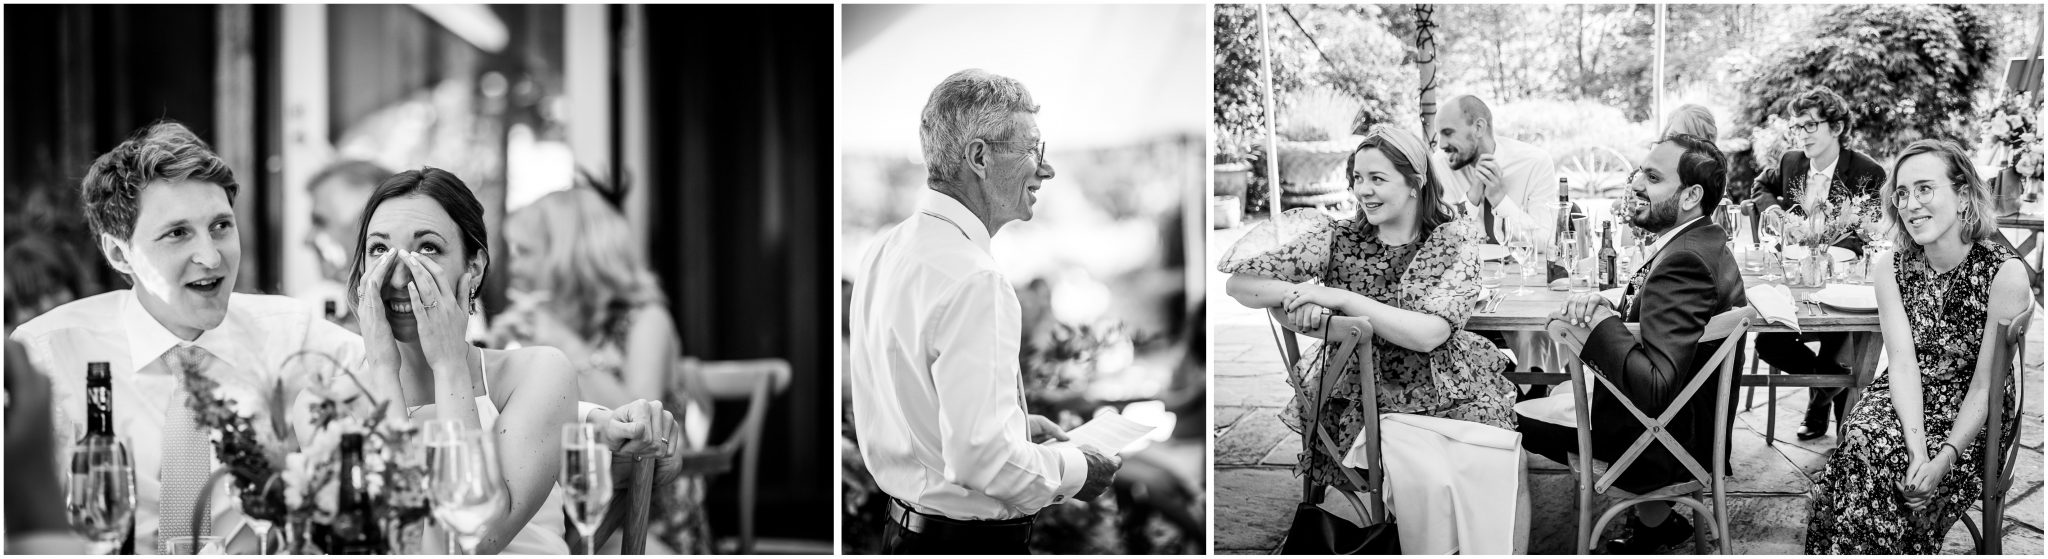 Black and white documentary photography during speeches